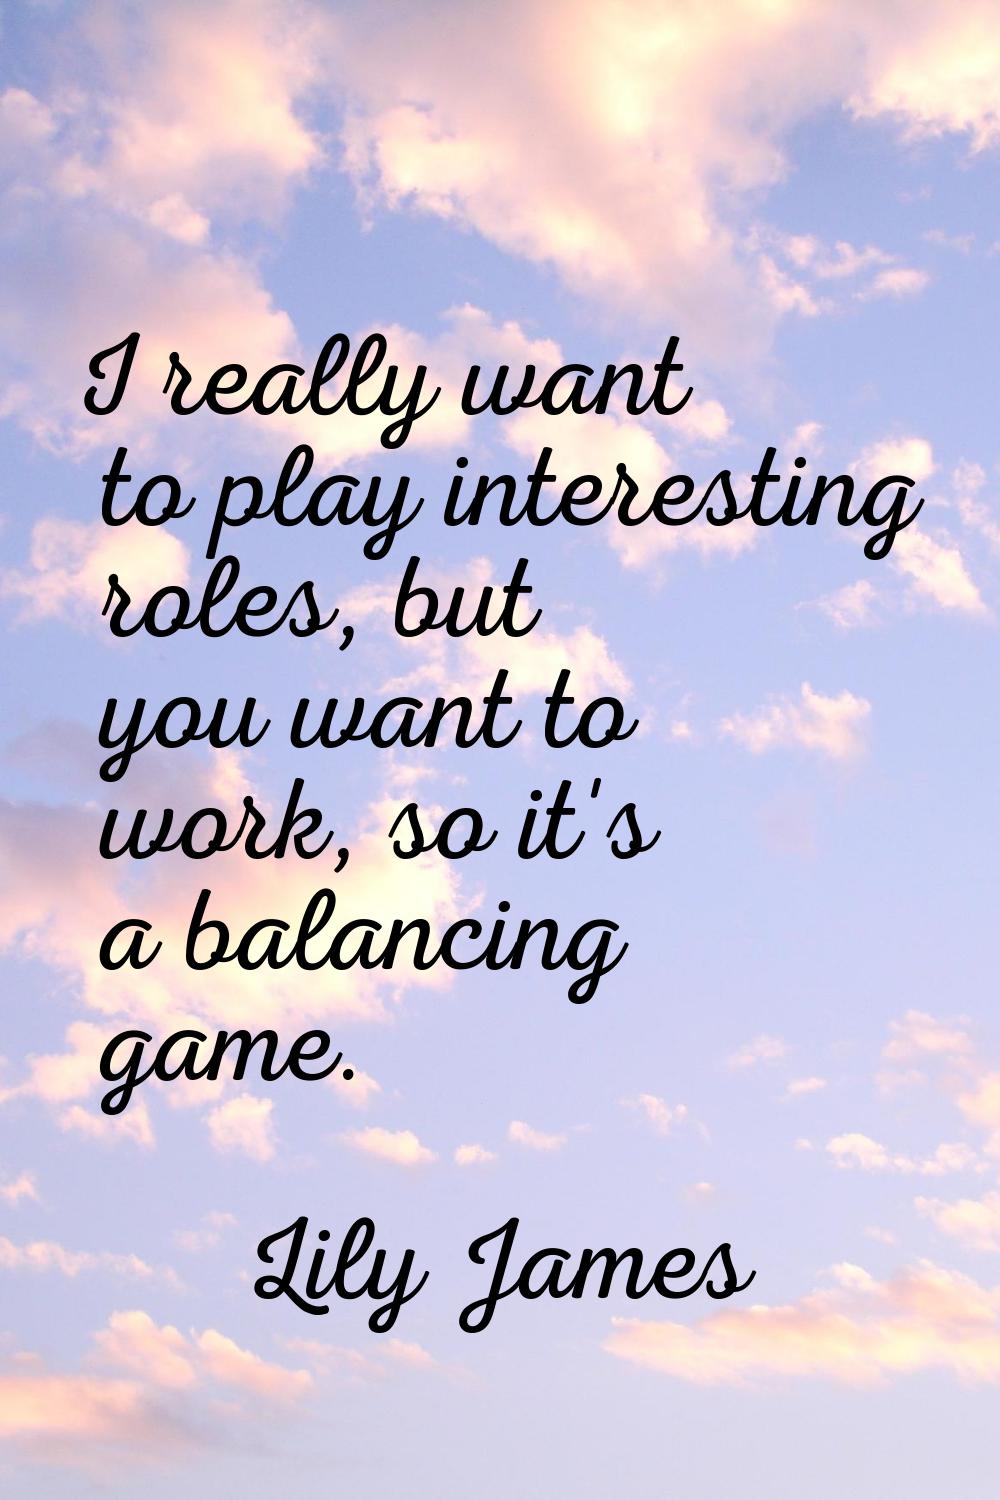 I really want to play interesting roles, but you want to work, so it's a balancing game.